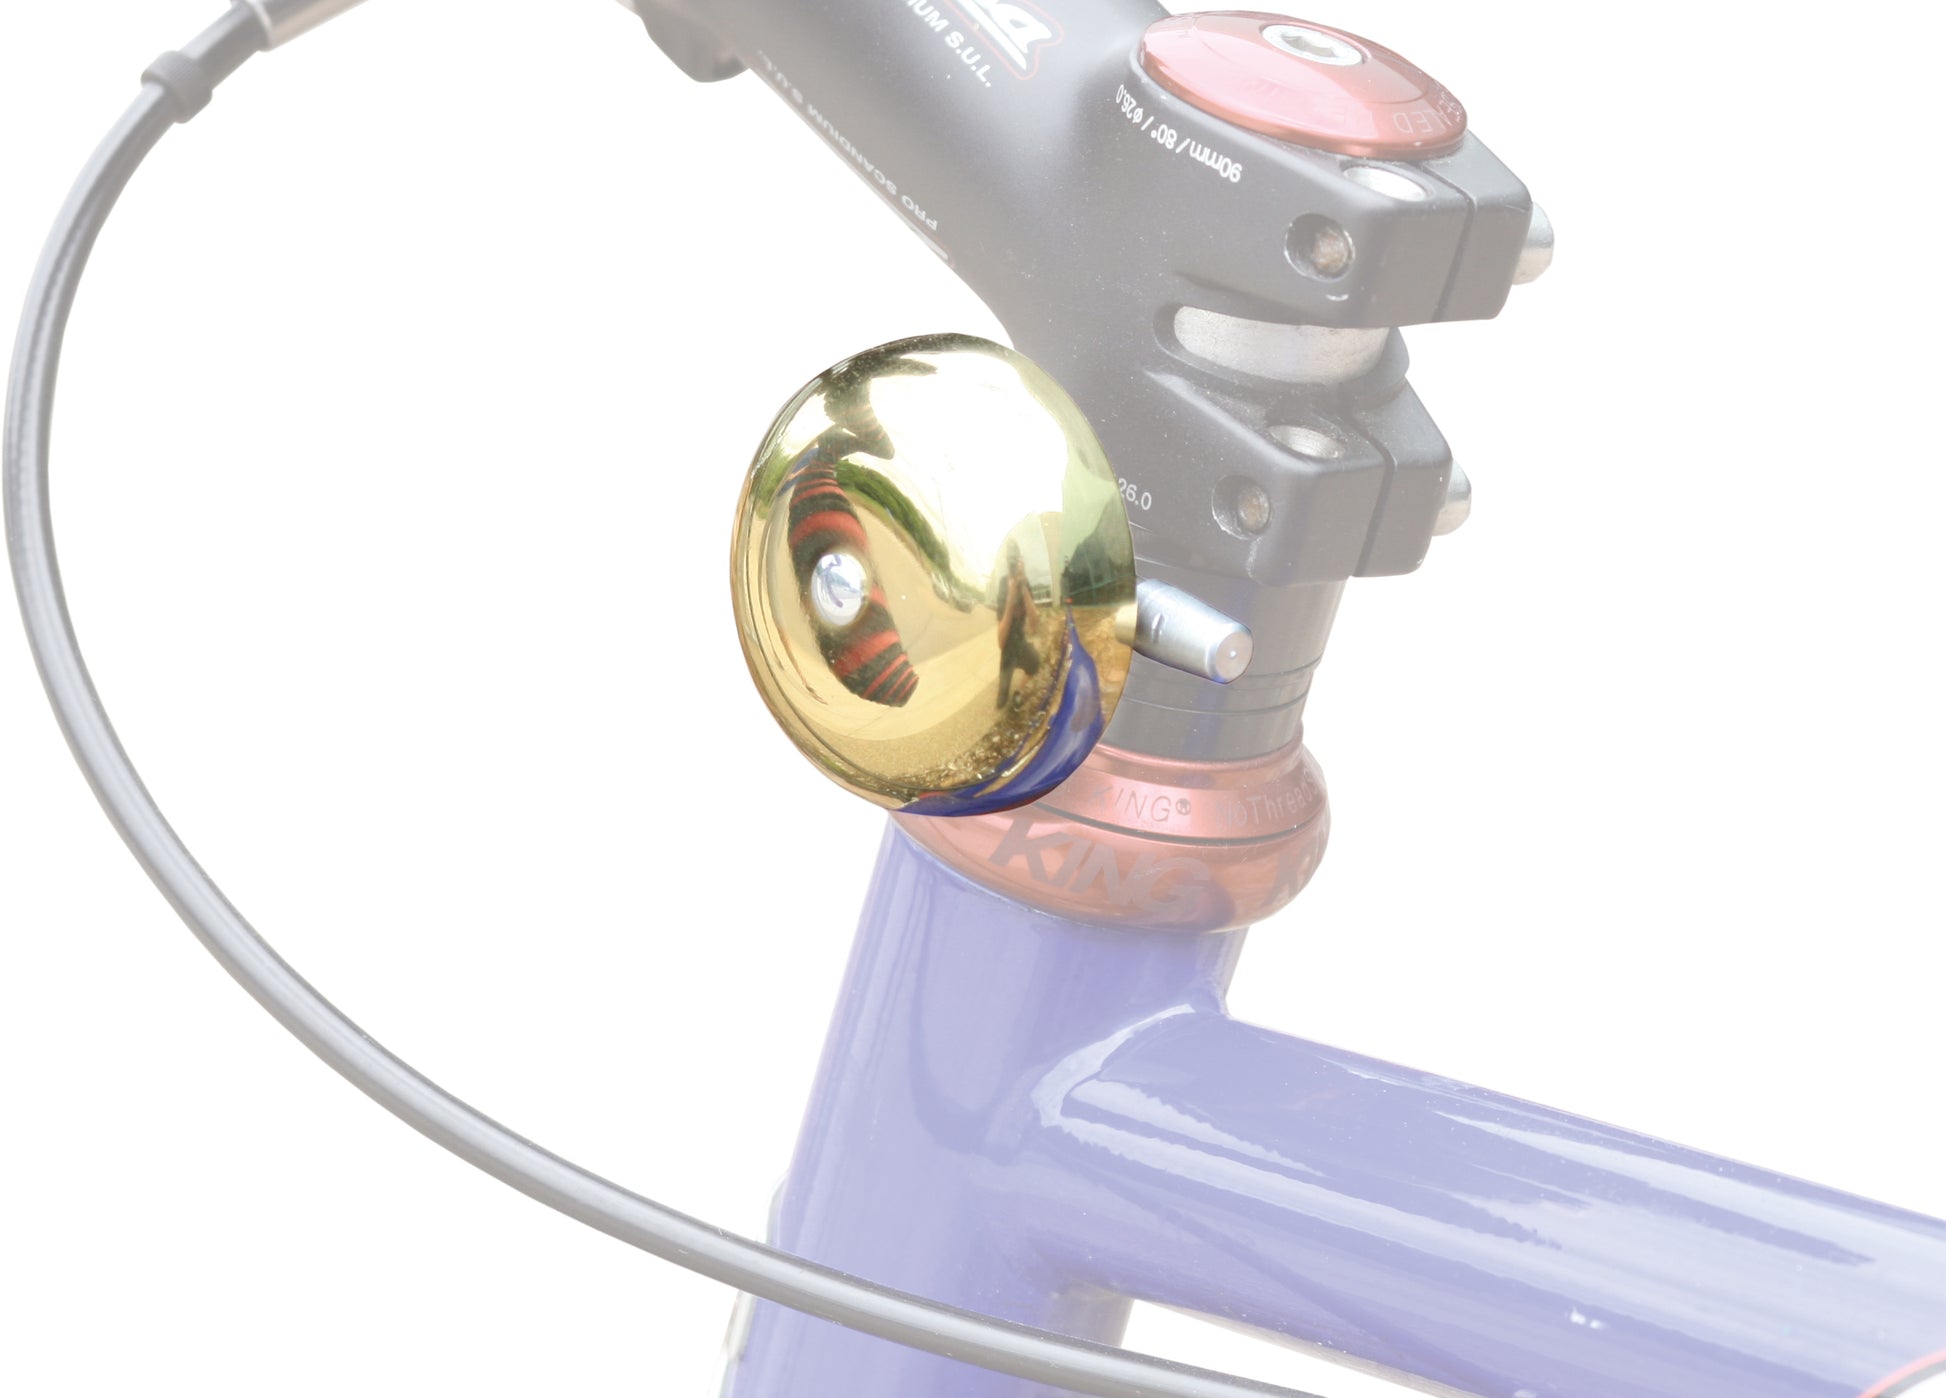 Dimension headset bell - Gold and black - shown mounted on a bike